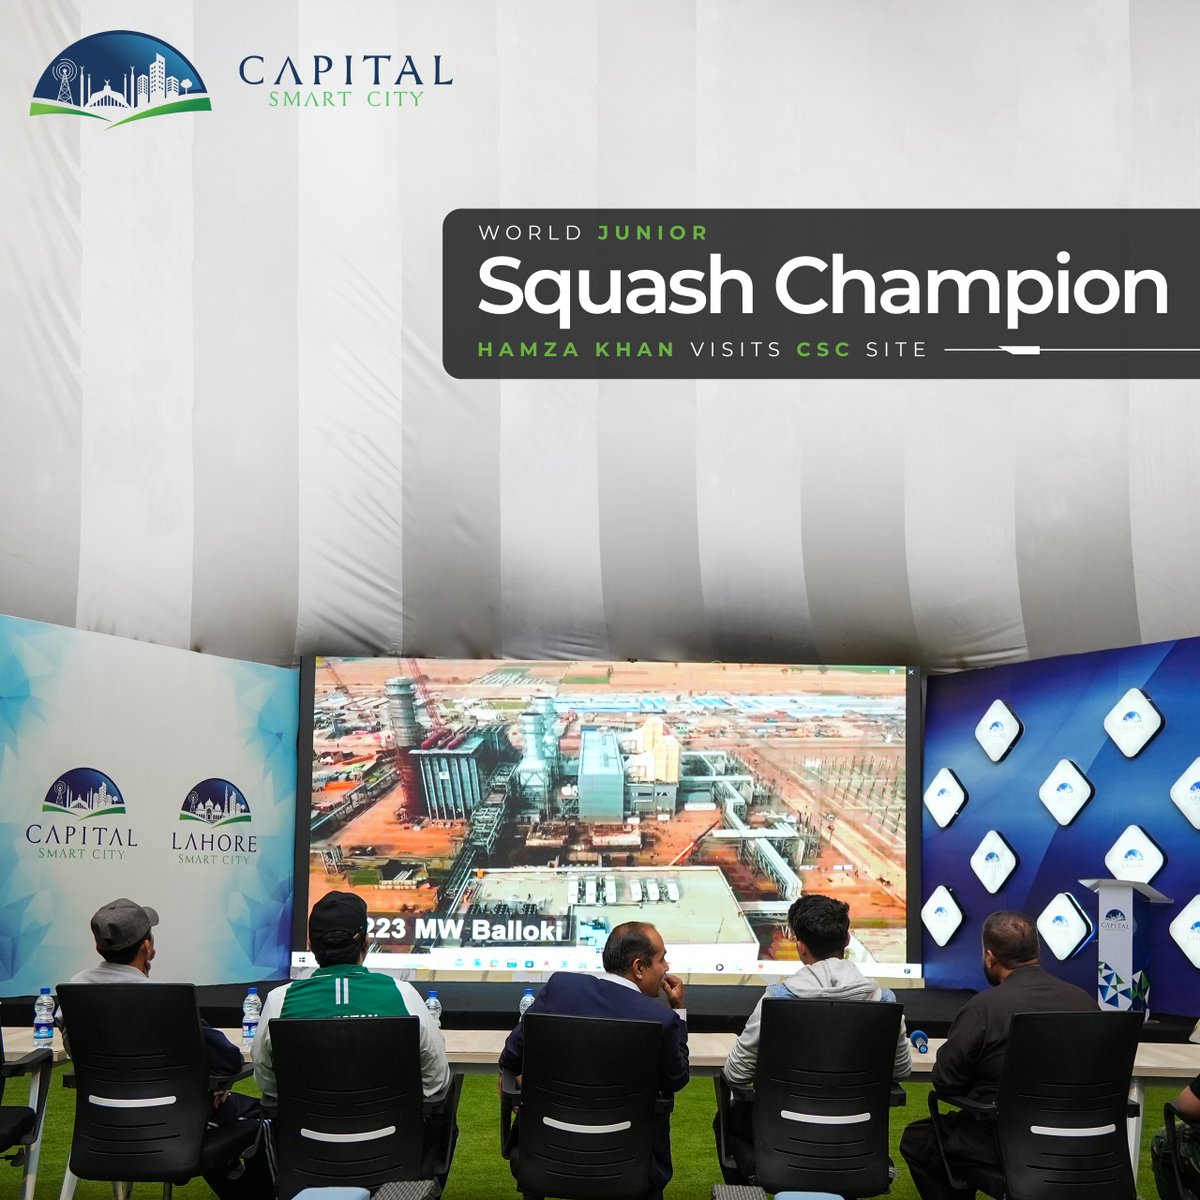 Capital Smart City rolls out the red carpet for 17-year-old squash sensation Hamza Khan, the newly crowned World Junior Squash Champion! #SmartCity #CapitalSmartCity #Squash #WorldJuniorSquashChampion #Sports